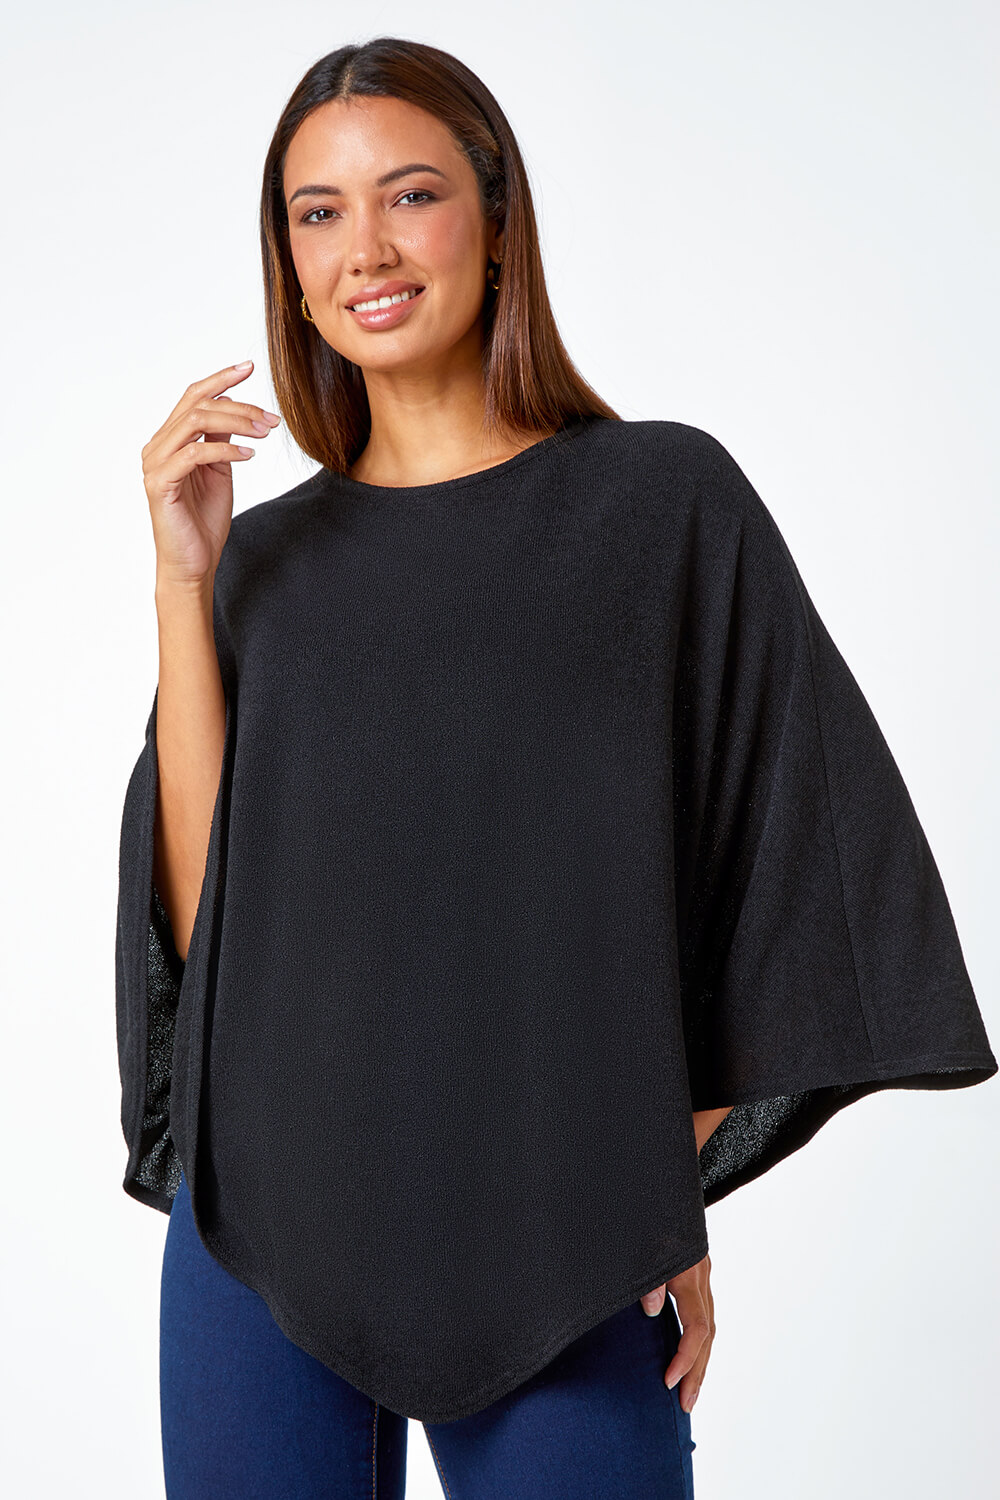 Black Marl Overlay Stretch Top, Image 2 of 5